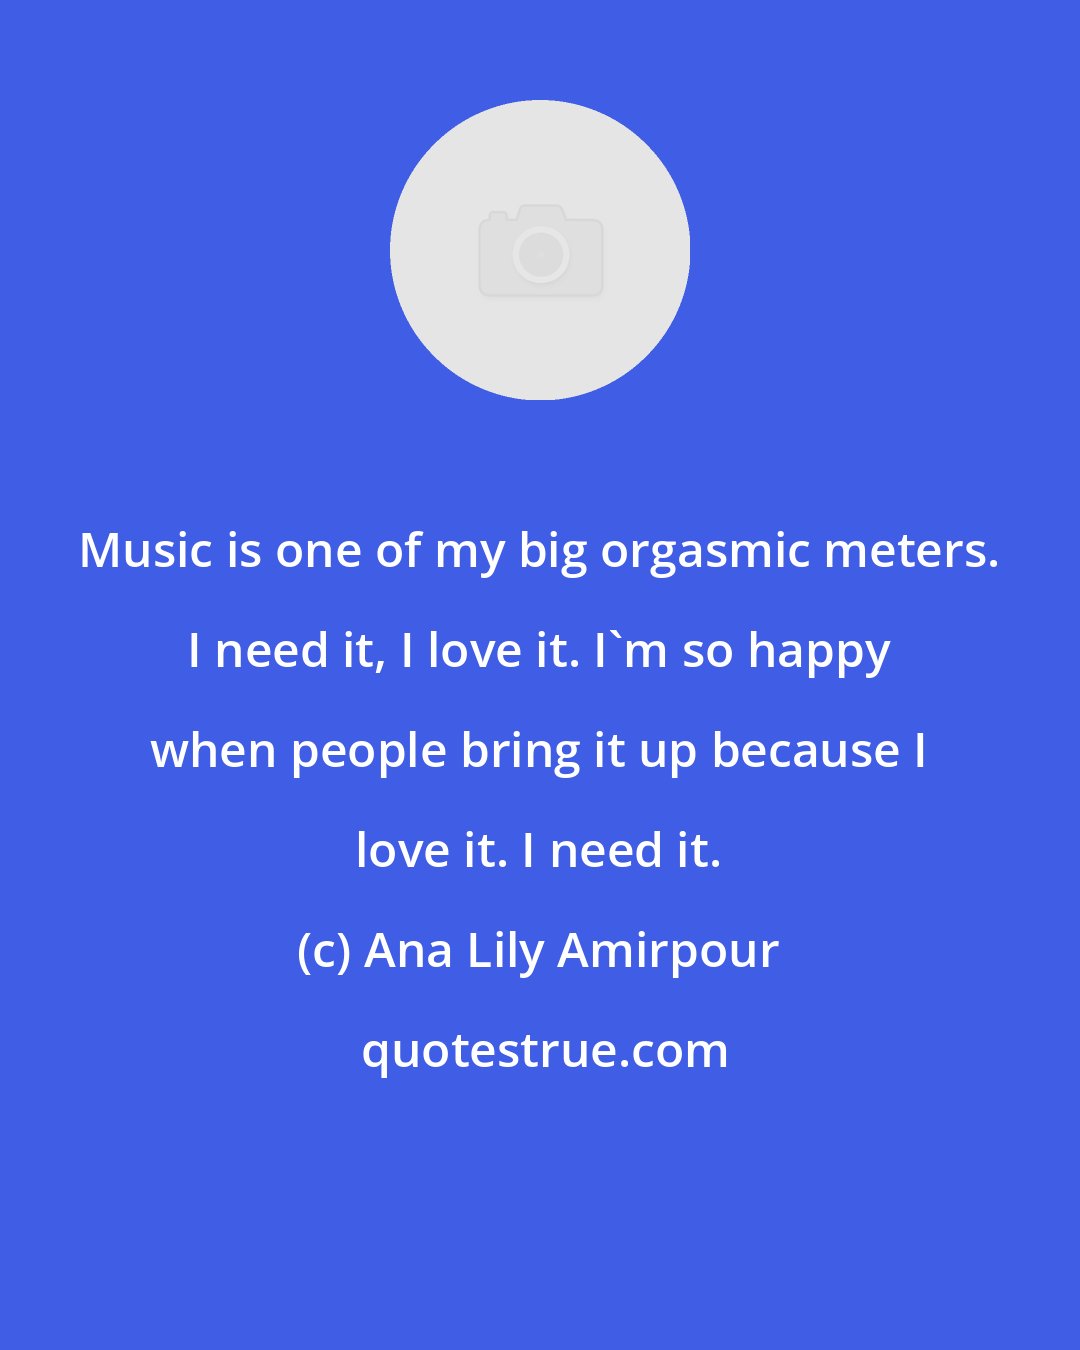 Ana Lily Amirpour: Music is one of my big orgasmic meters. I need it, I love it. I'm so happy when people bring it up because I love it. I need it.